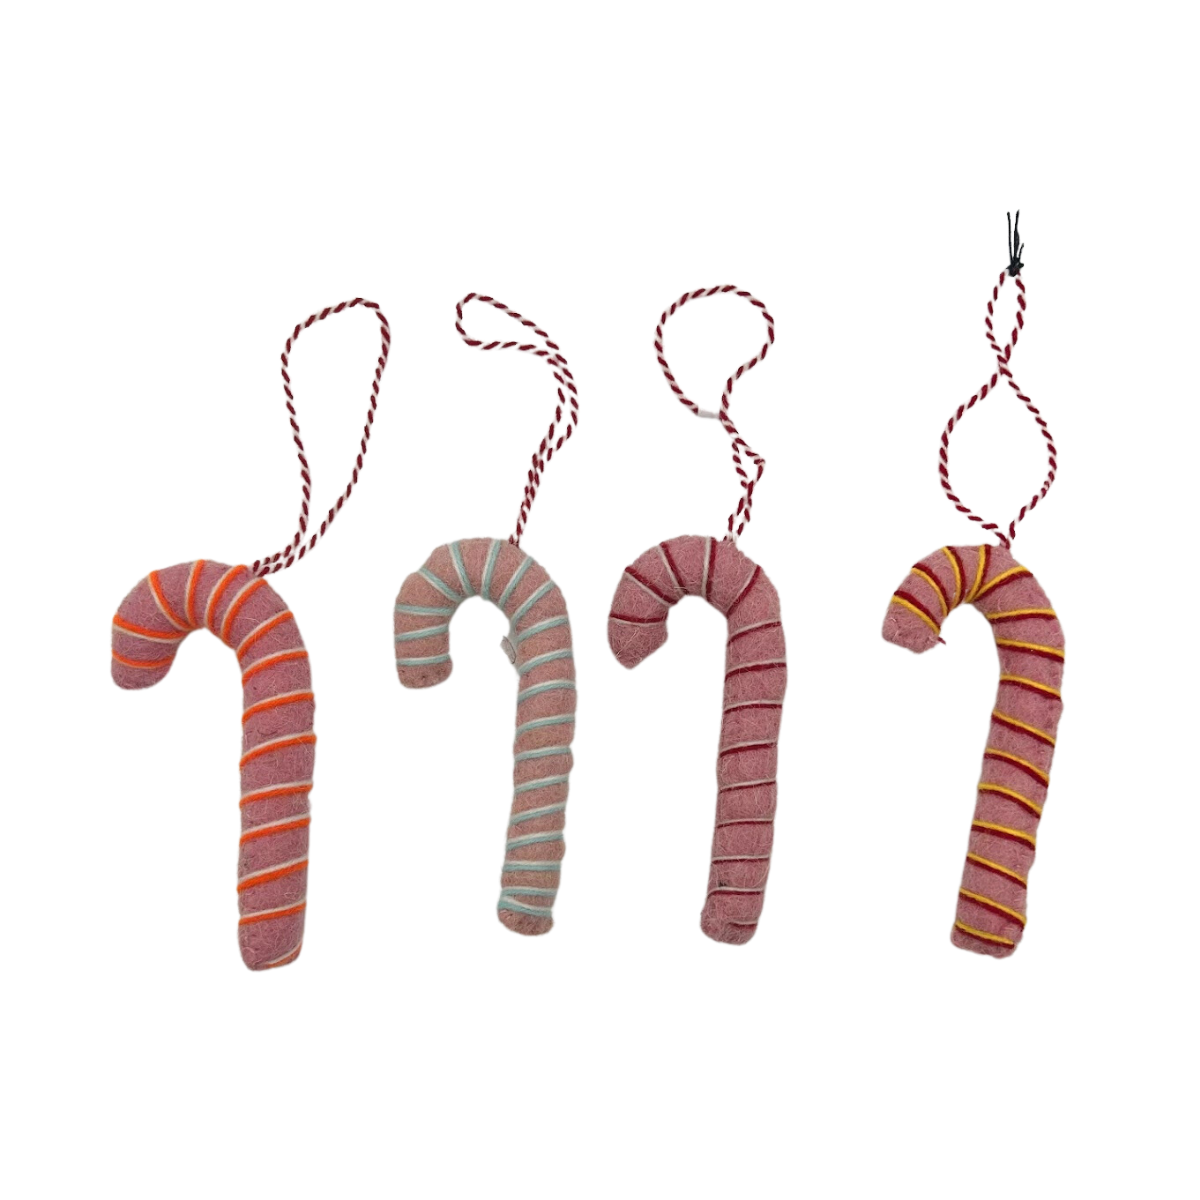 Felted Wool Candy Cane Ornaments, Set of 4